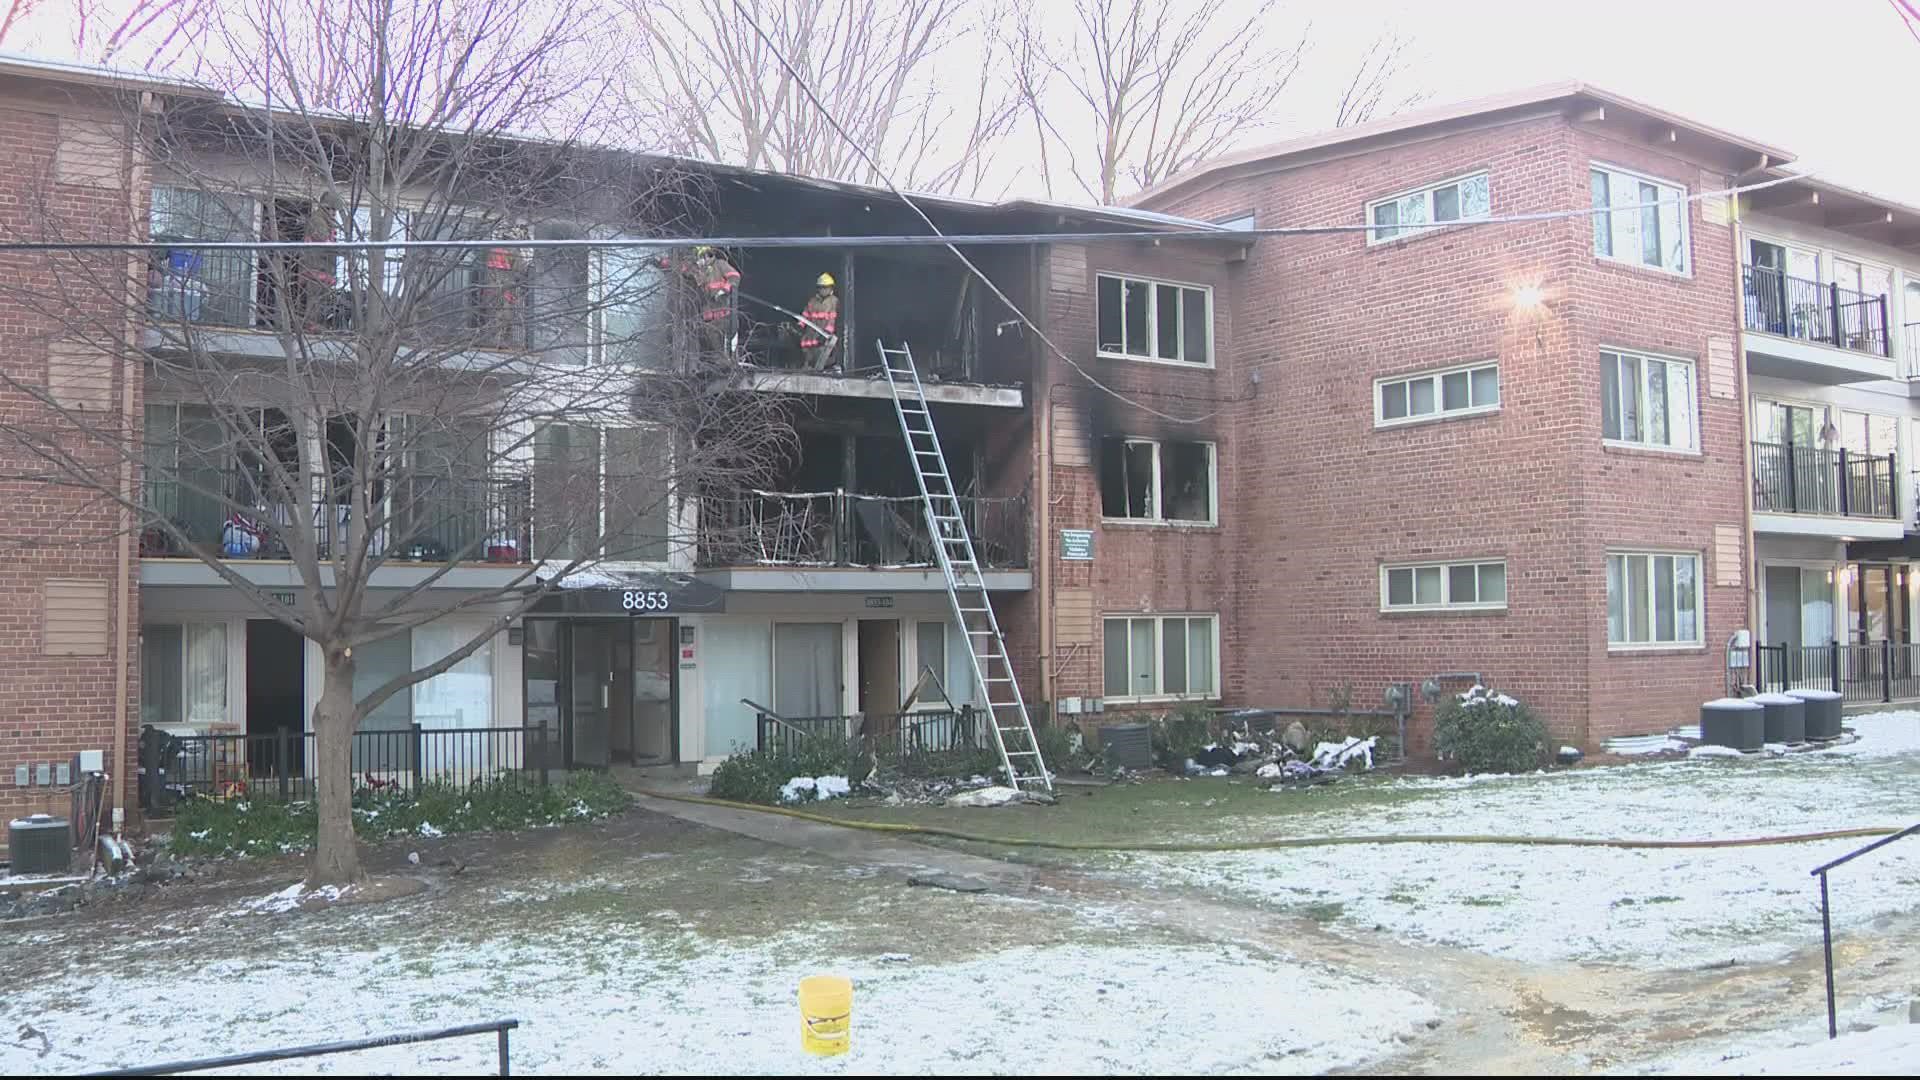 The fire at the garden-style apartments on Garland Avenue spread to two stories, requiring rescues. The same complex was rocked by an explosion in 2016.